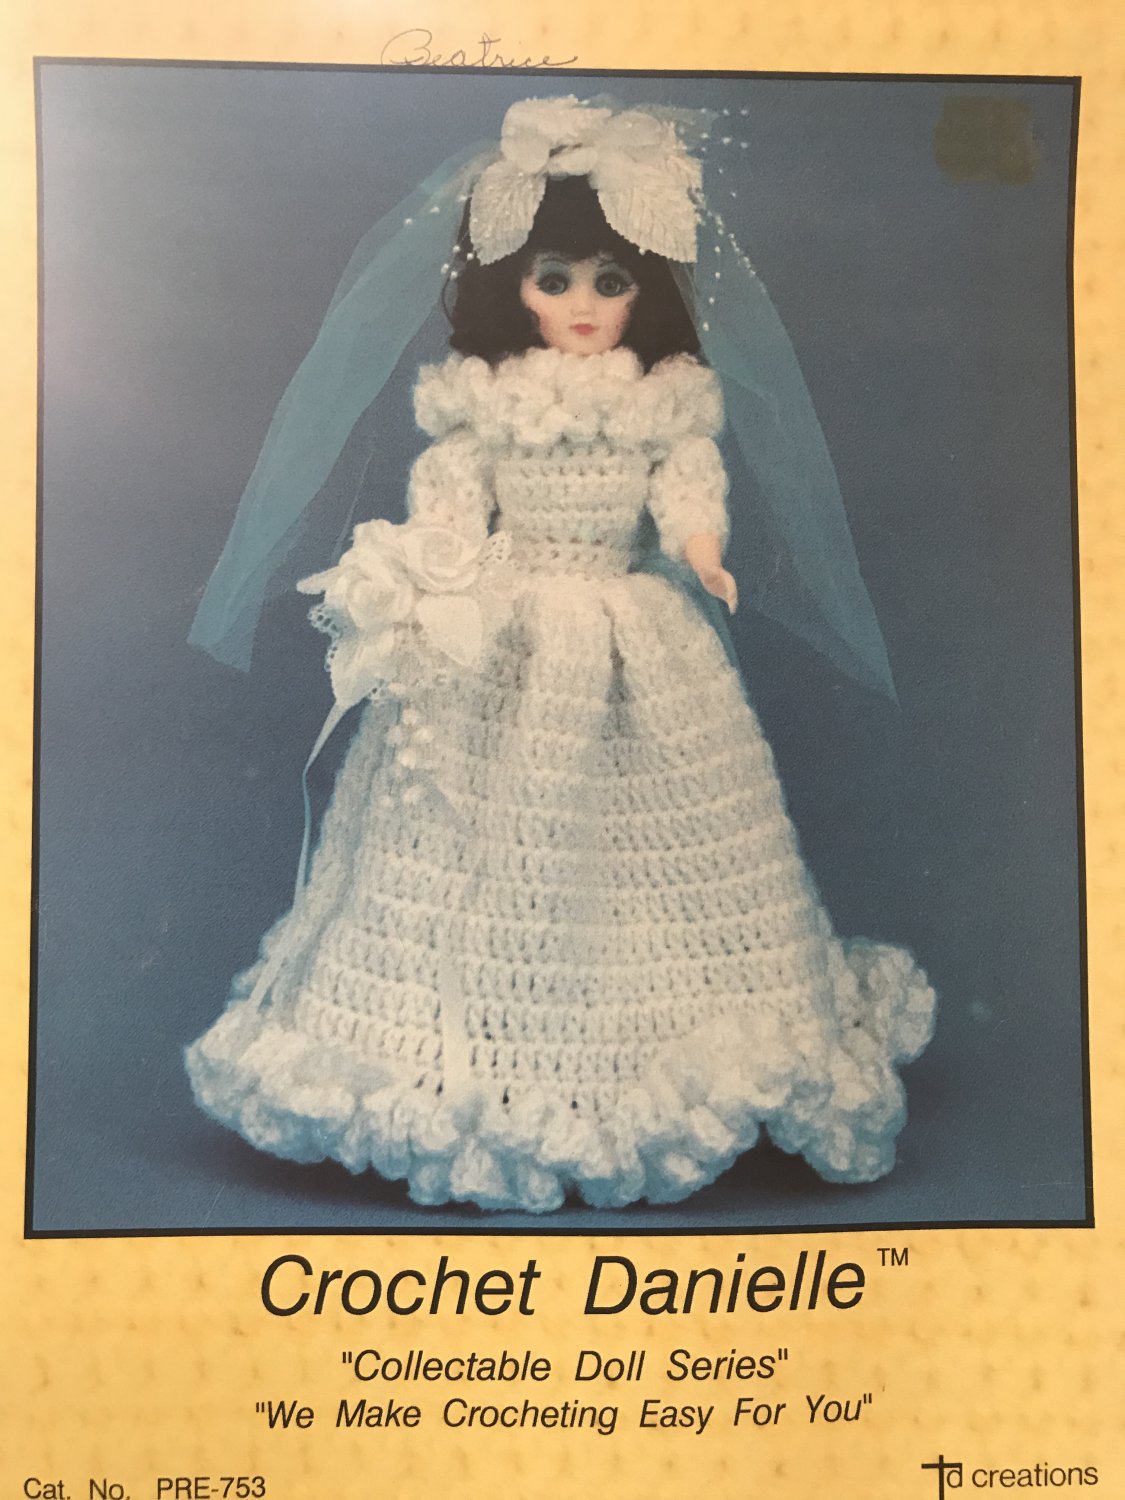 Crochet gown 15 inch Doll Danielle TD Creations Collectable Doll Series PRE-753  Bride Doll Gown